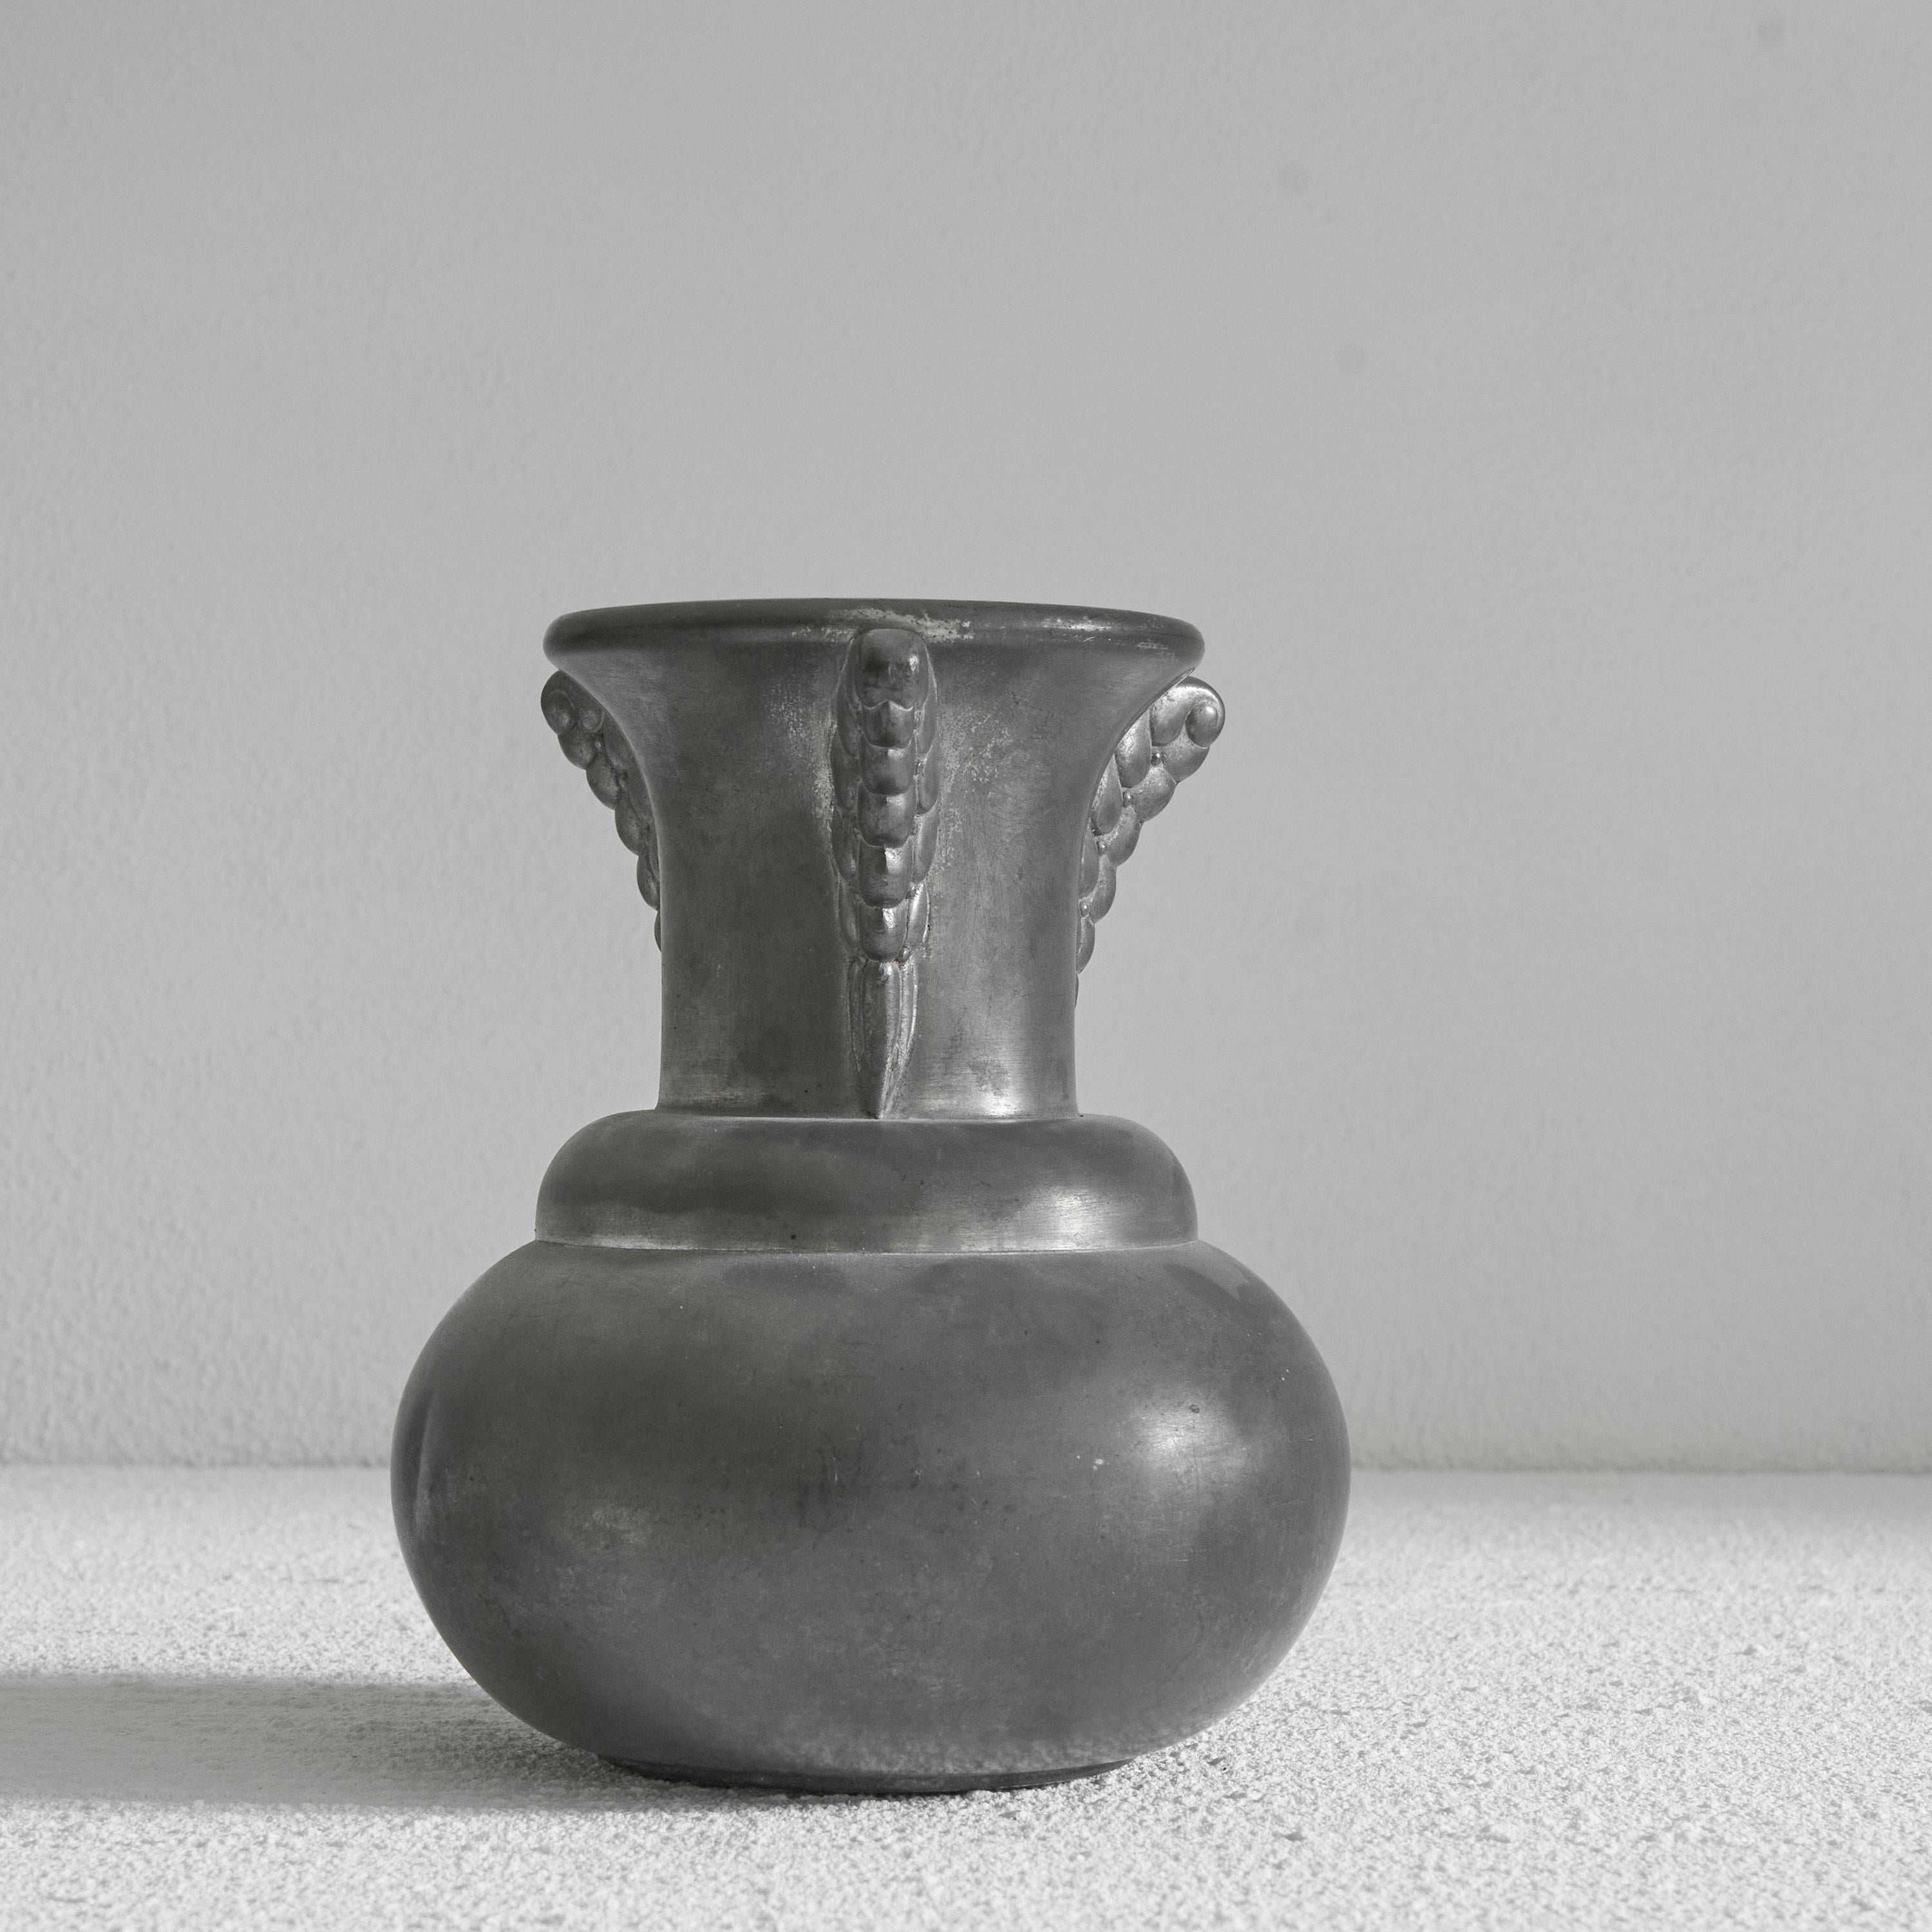 Art Deco Vase in Pewter. Netherlands, early 20th century.

Very decorative and elegant art deco vase in pewter. A distinct design, probably made by Chris van der Hoef. 

Decorative piece with a very elegant art deco design. 

Great vintage